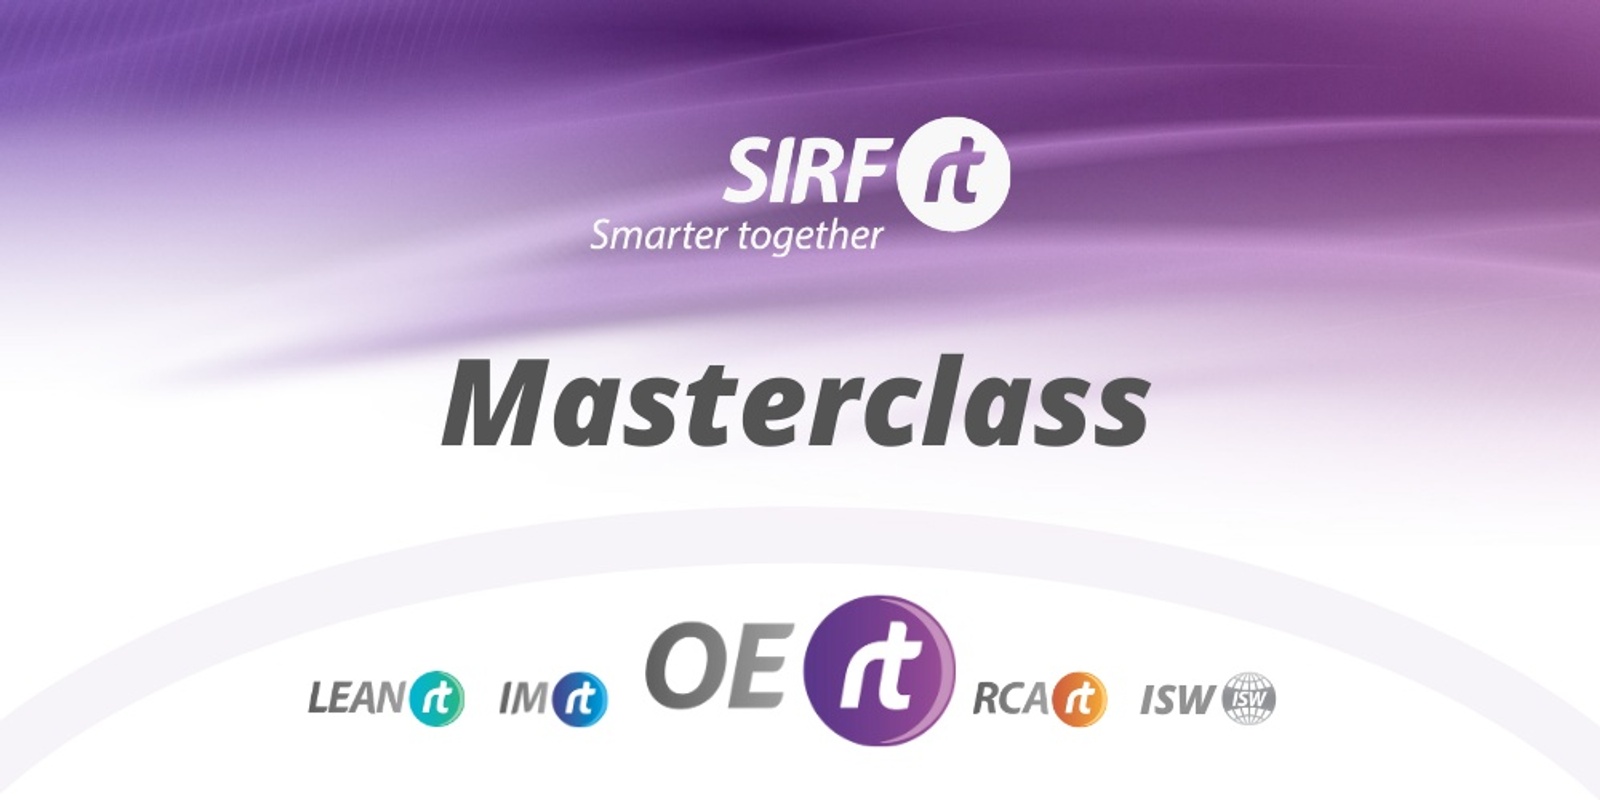 Banner image for OERt Masterclass |Developing a Servant Leadership Mindset  with VATIVE and Mark Oliver from MarkTwo Consulting  -  On Line   &    Face to Face